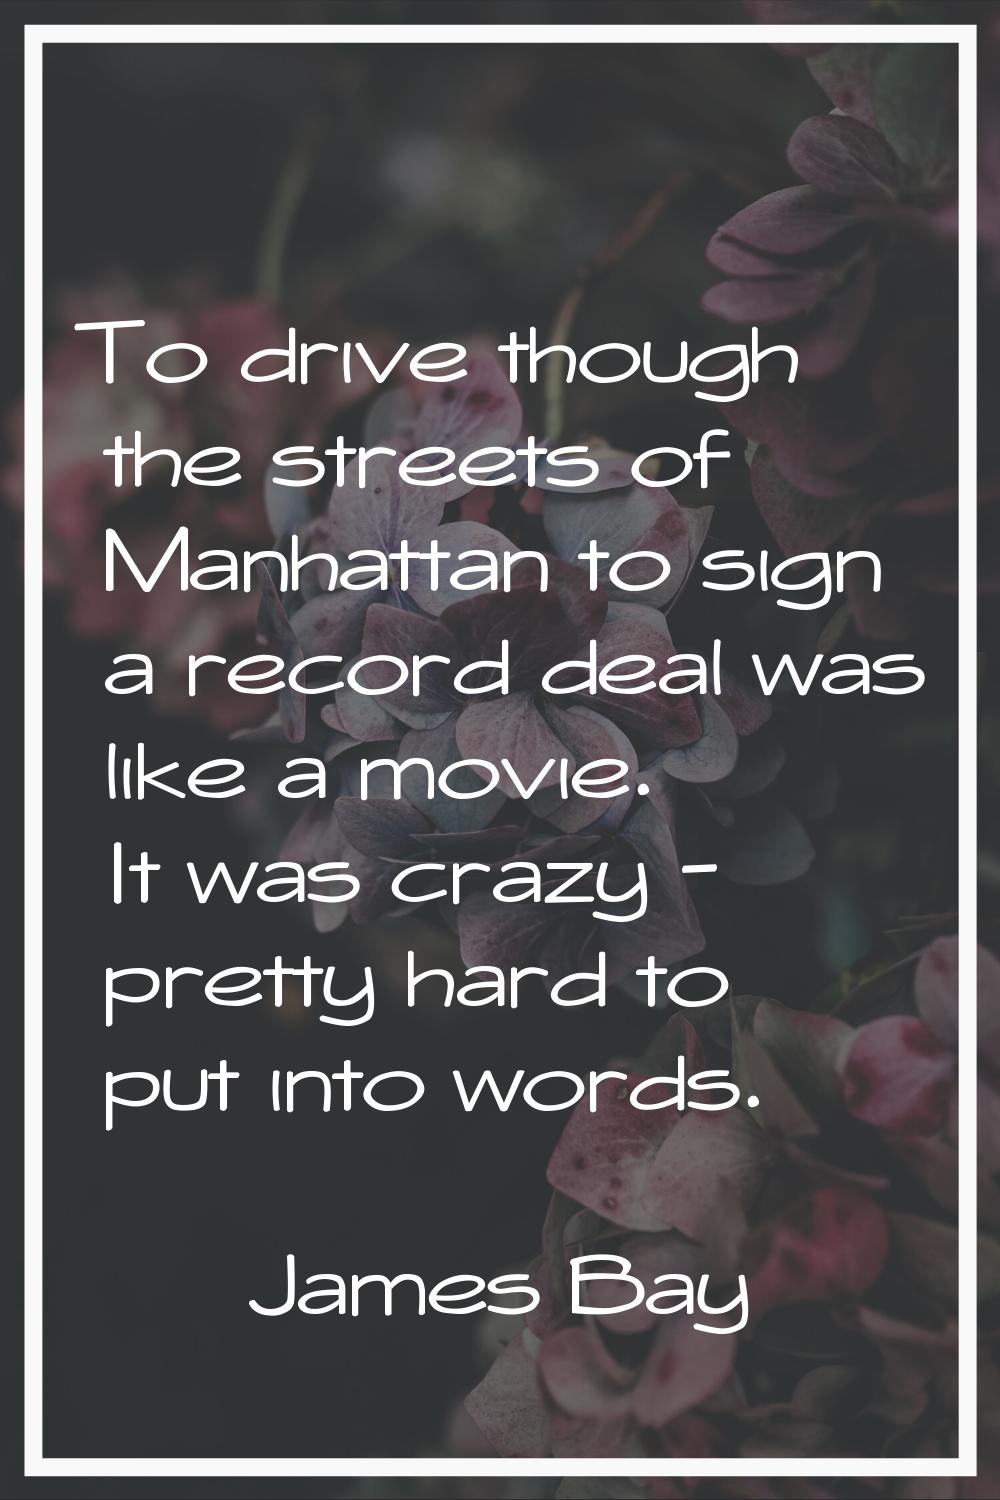 To drive though the streets of Manhattan to sign a record deal was like a movie. It was crazy - pre